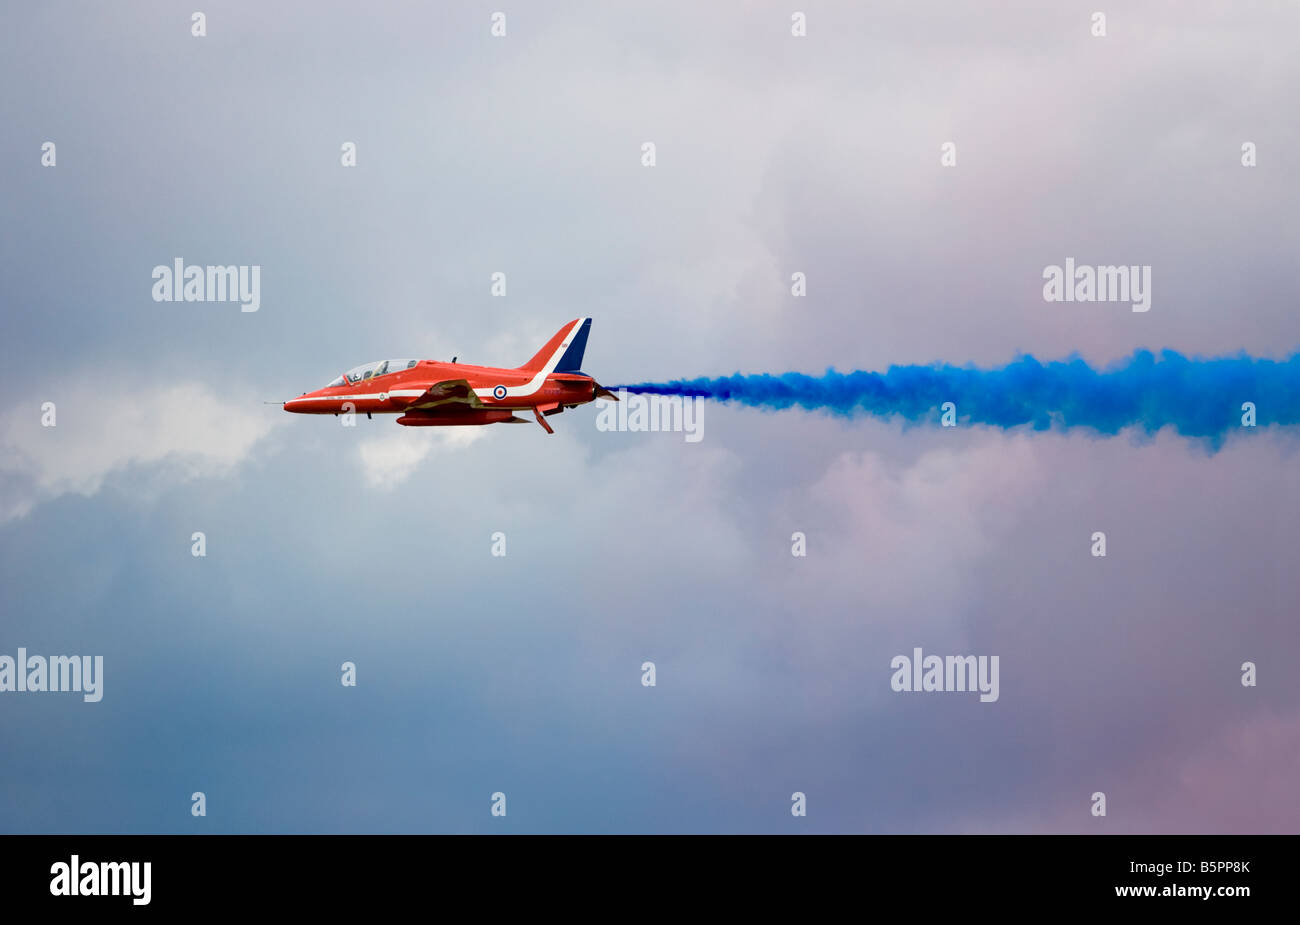 A Royal Airforce Red Arrows Hawk T1 jet aircraft performs a flypast during a display in Gloucestershire, England. Stock Photo